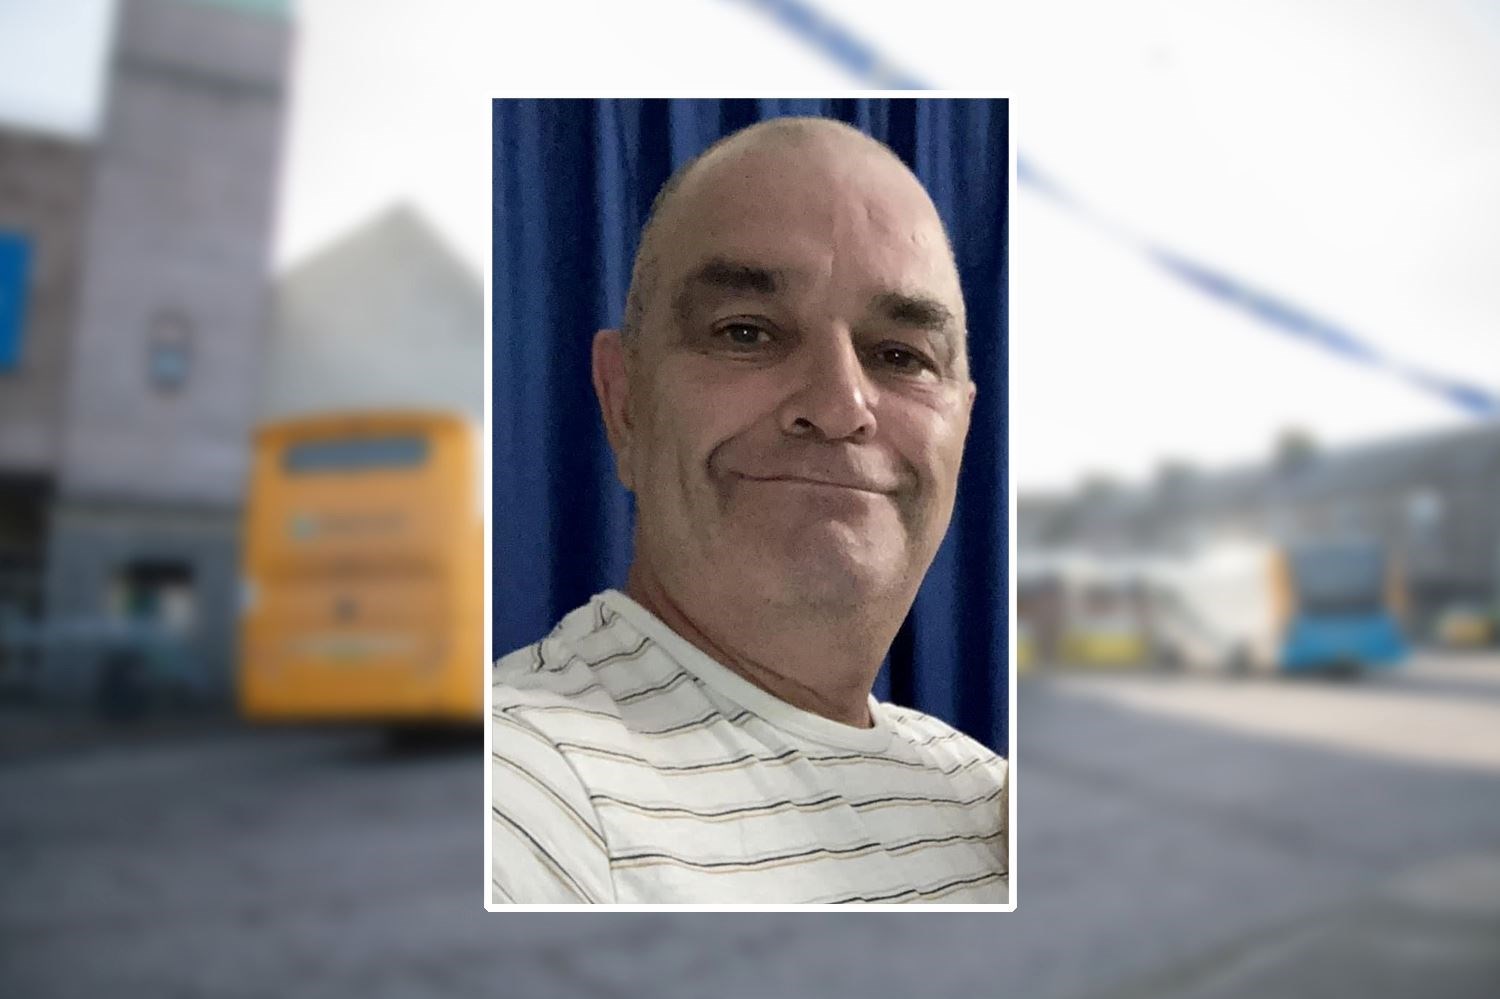 The Scottish Government has been urged to make it a specific offence to commit a crime against transport workers following the tragic death of Elgin bus driver Keith Rollinson.